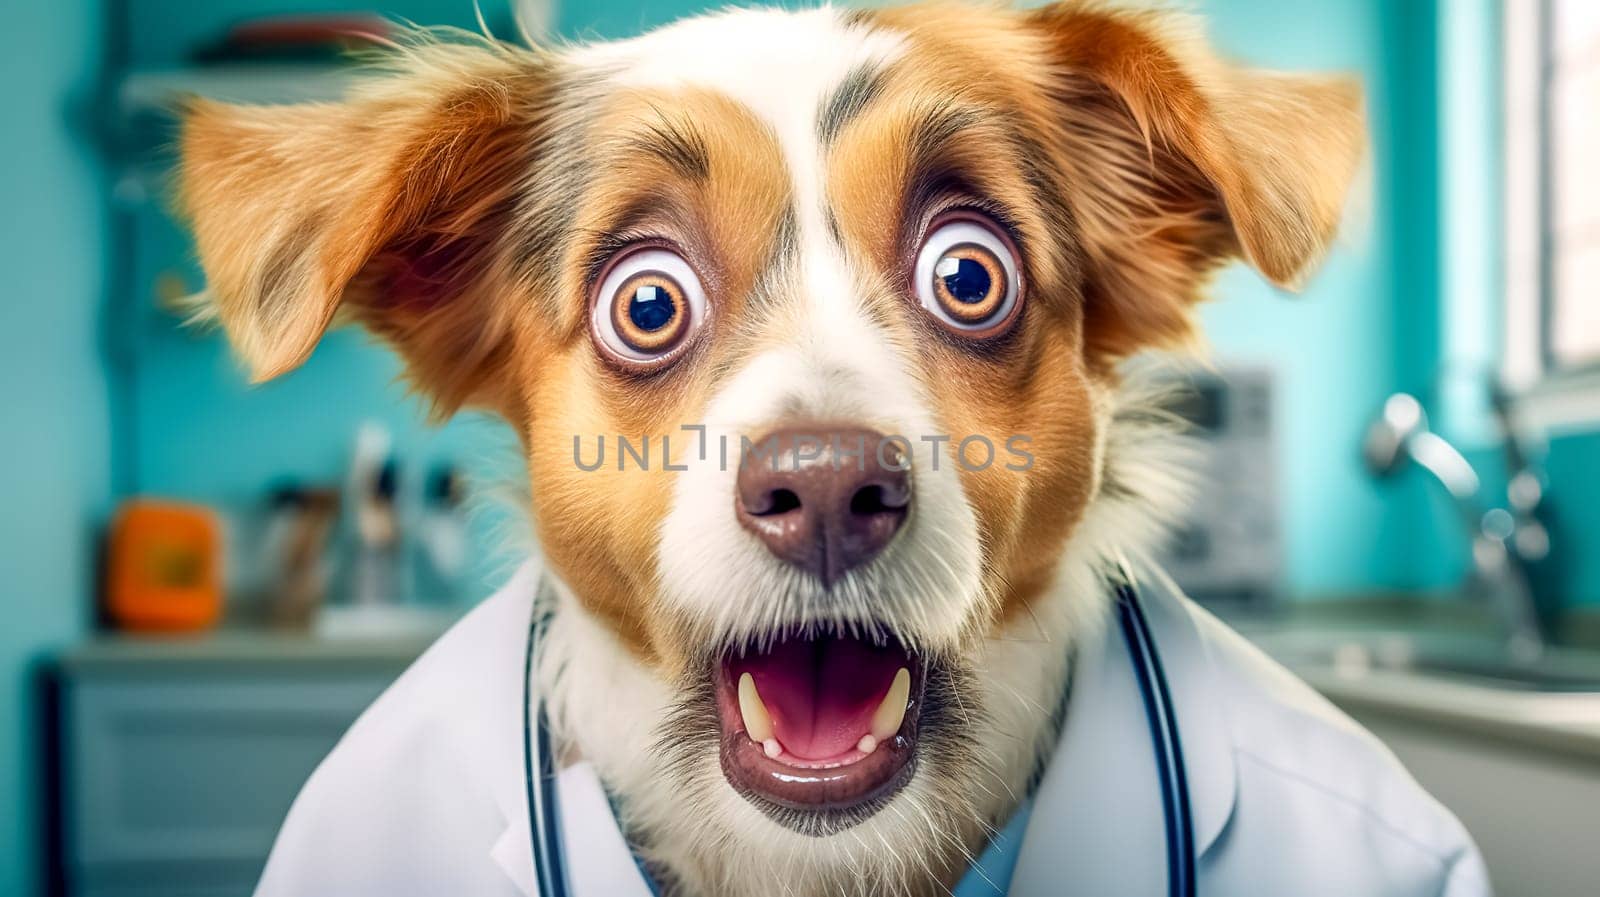 surprised appearance of a dog in a doctor's outfit in a veterinary clinic, Astonished expression by Edophoto